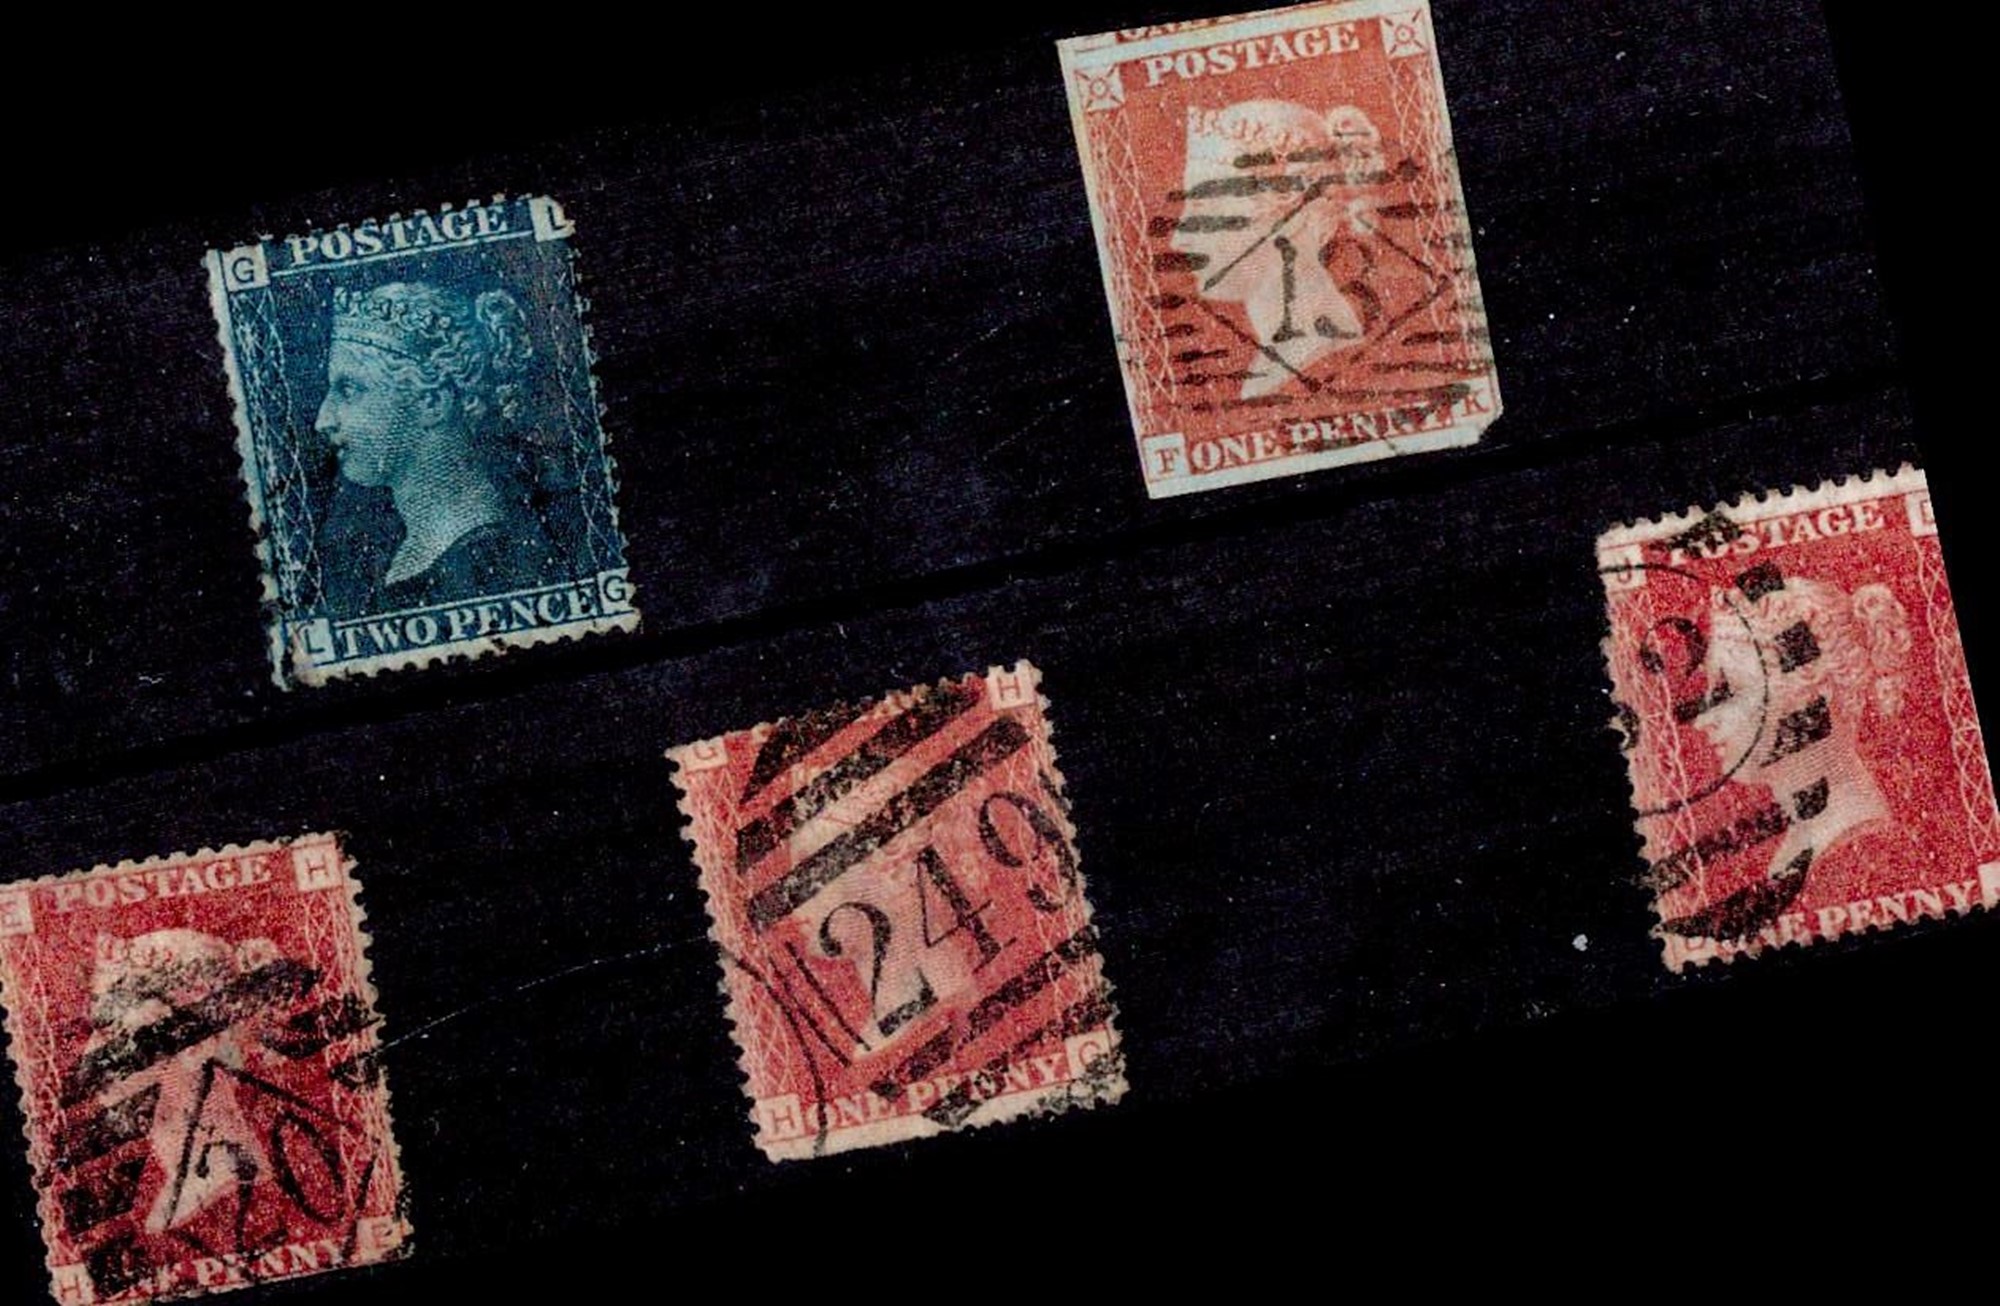 GB 5 Old Stamps. Good condition. We combine postage on multiple winning lots and can ship worldwide.